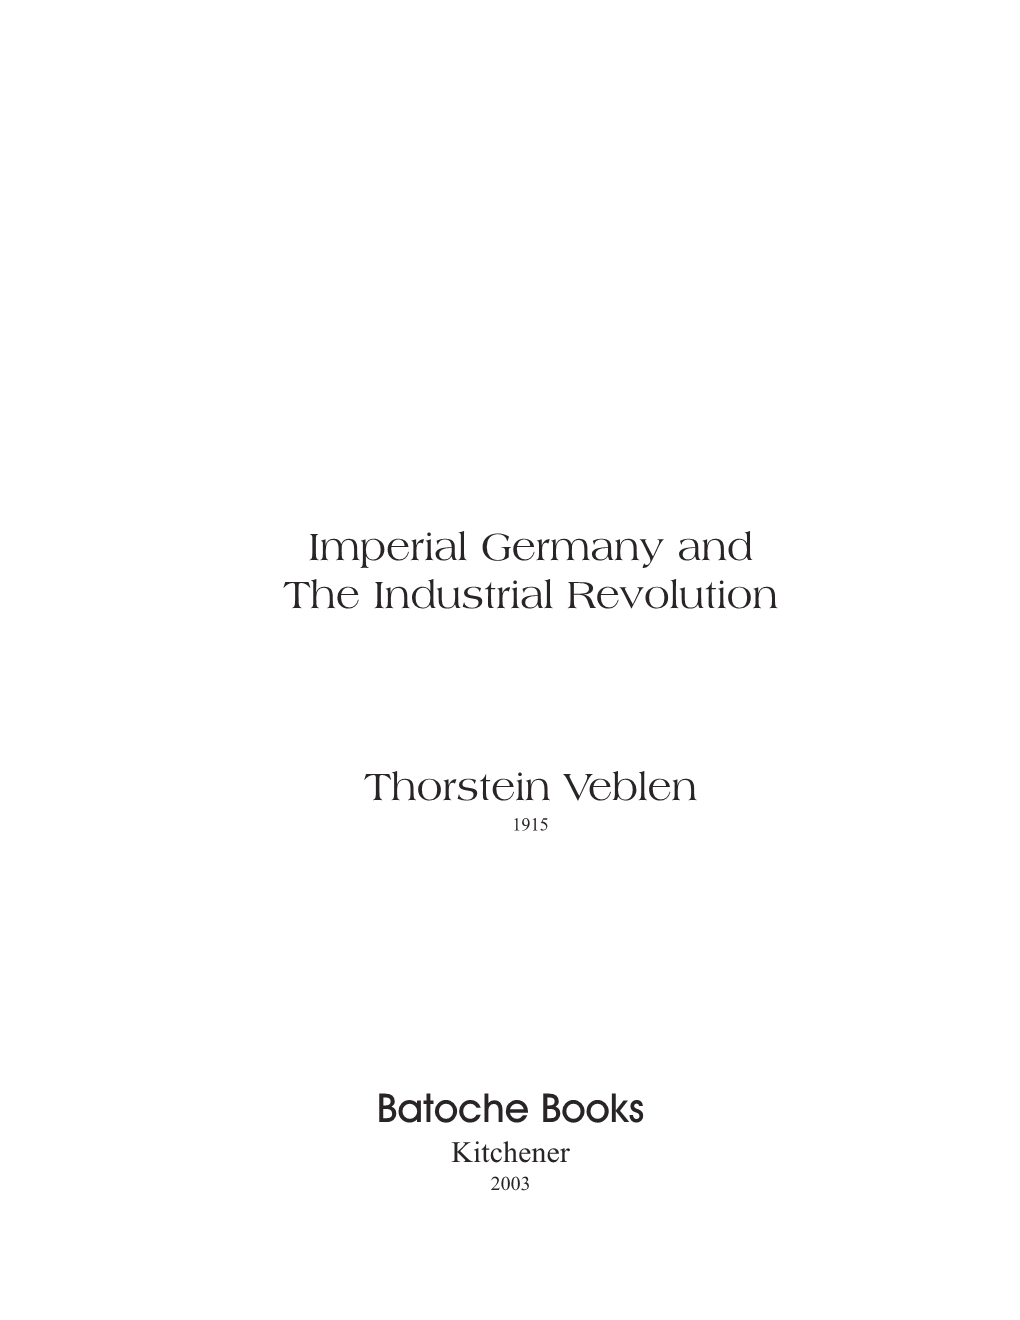 Imperial Germany and the Industrial Revolution Thorstein Veblen